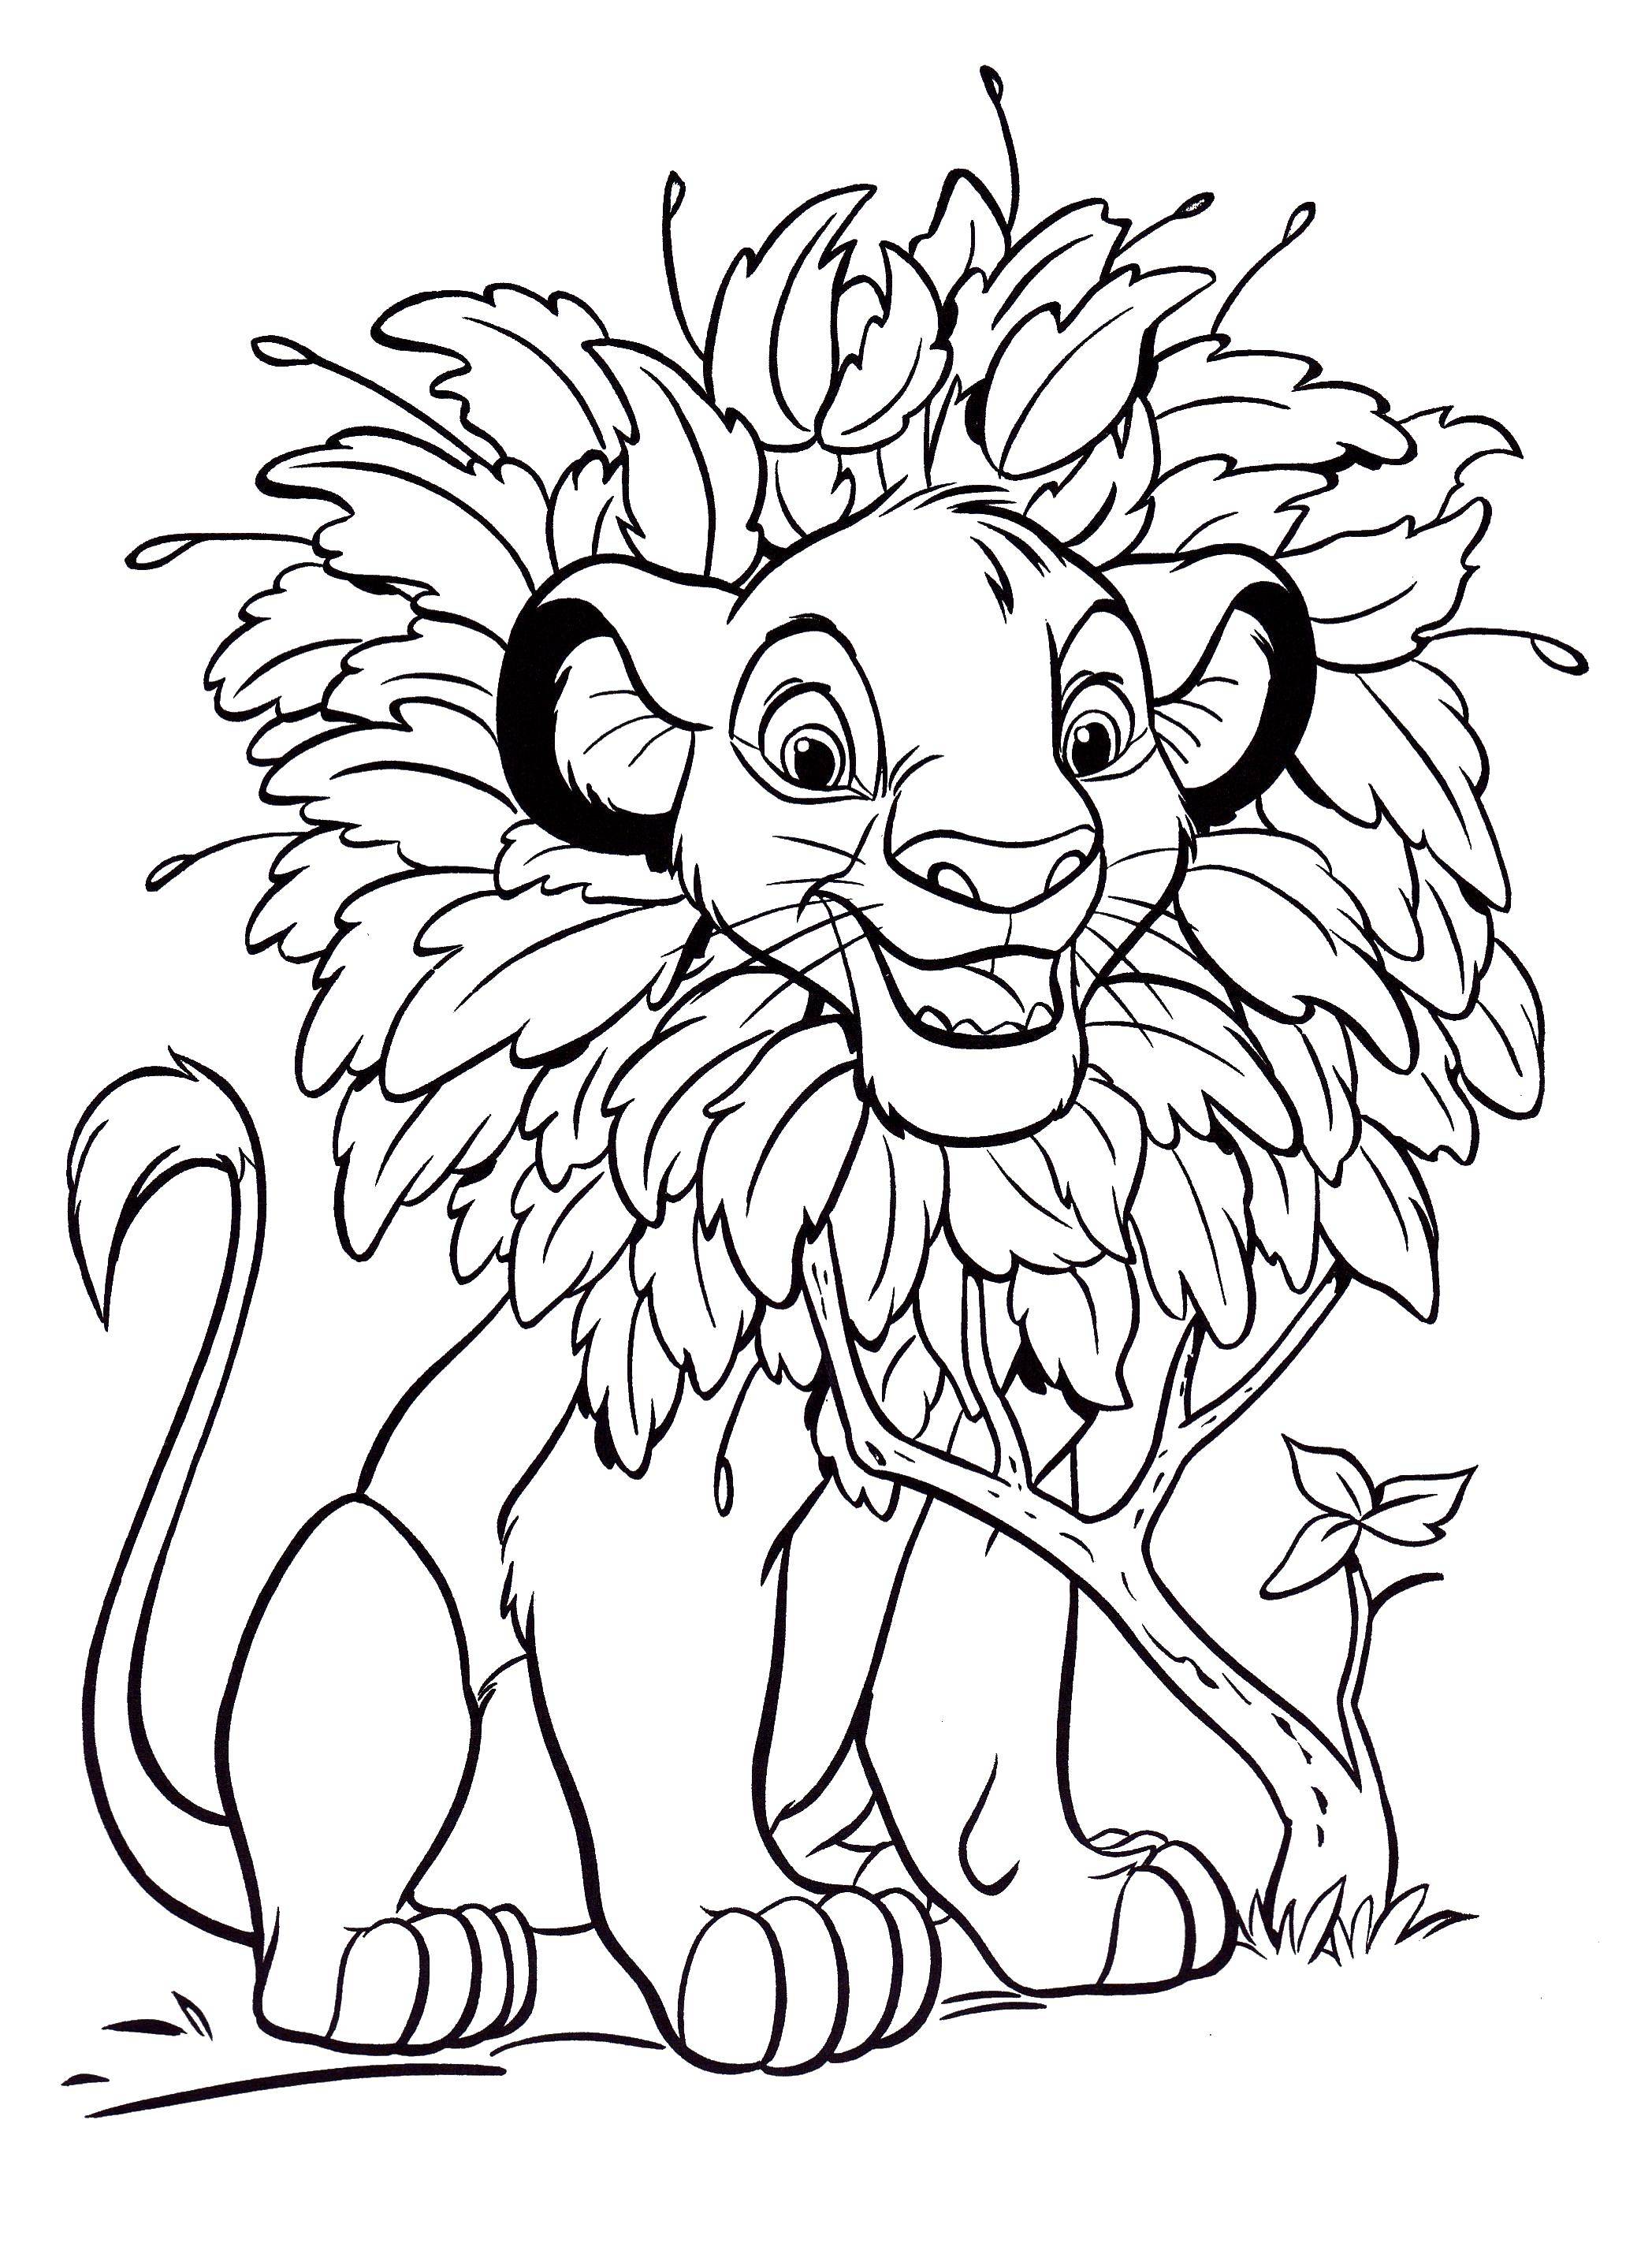 Coloring Simba leaves. Category Disney coloring pages. Tags:  Simba, a lion cub, leaves.